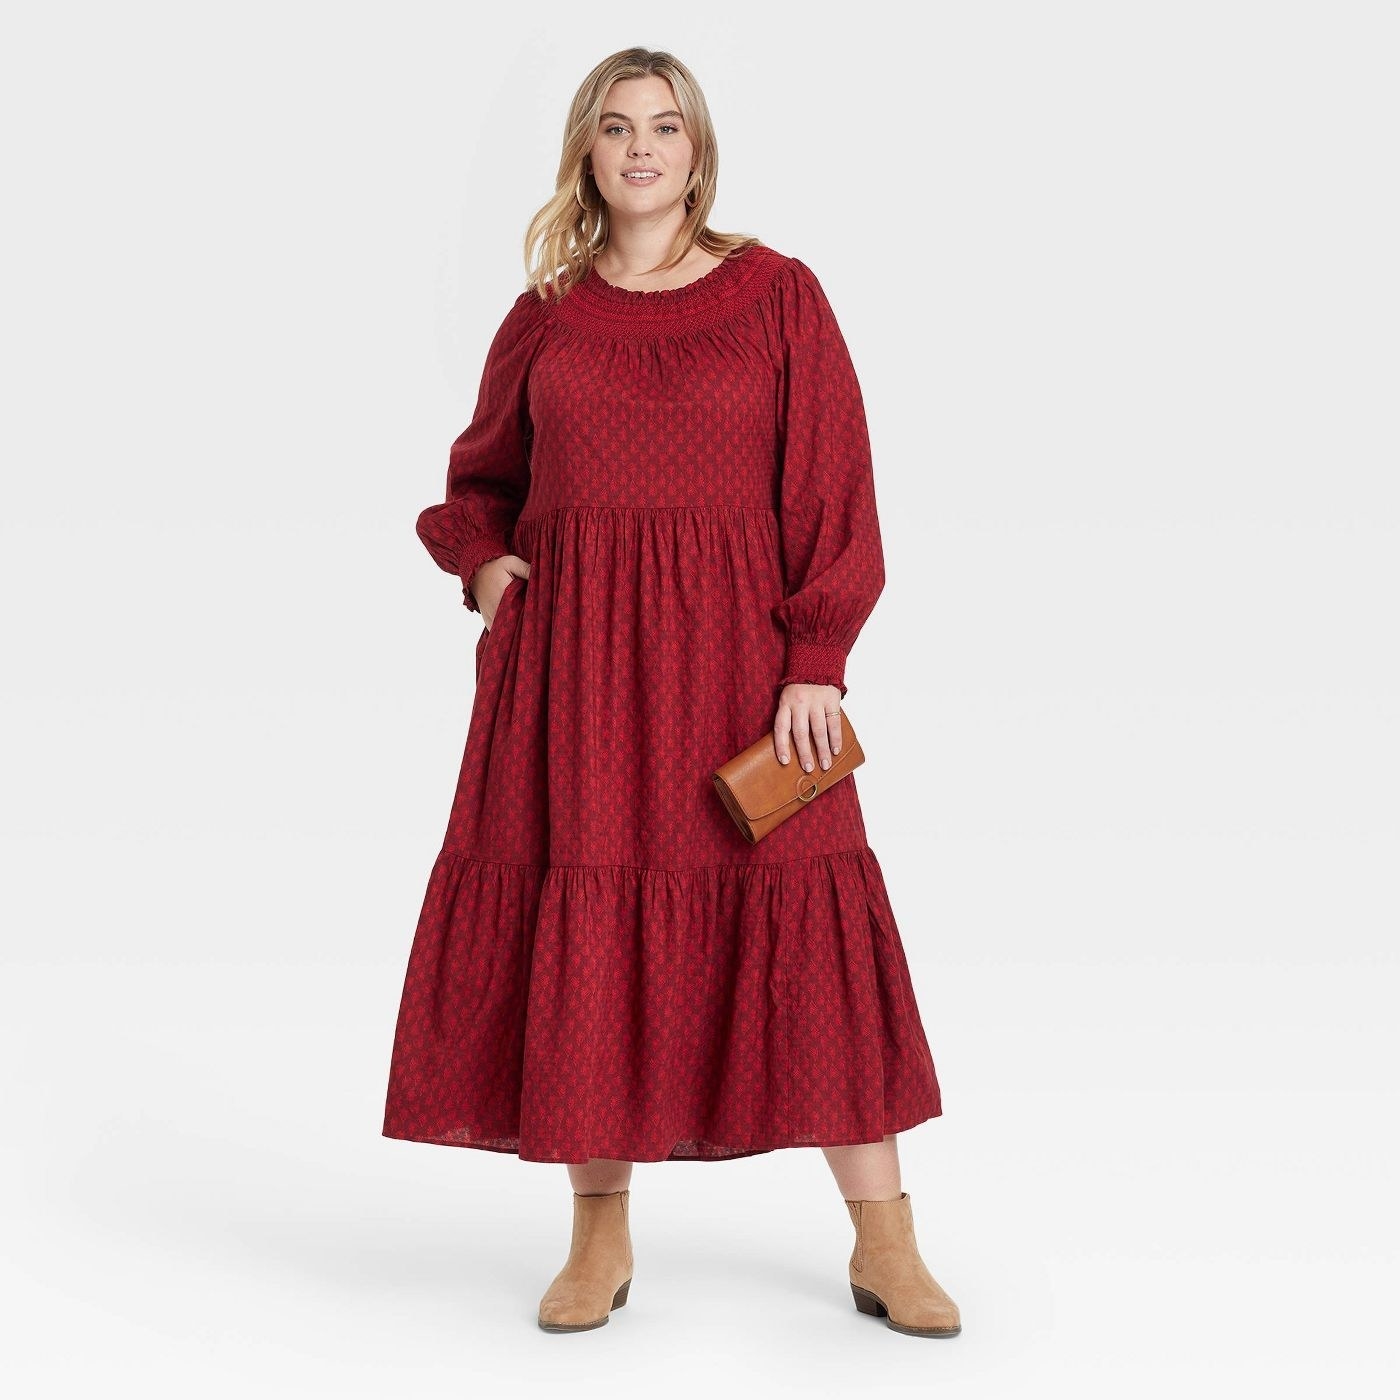 model in red monochromatically patterned tiered maxi dress